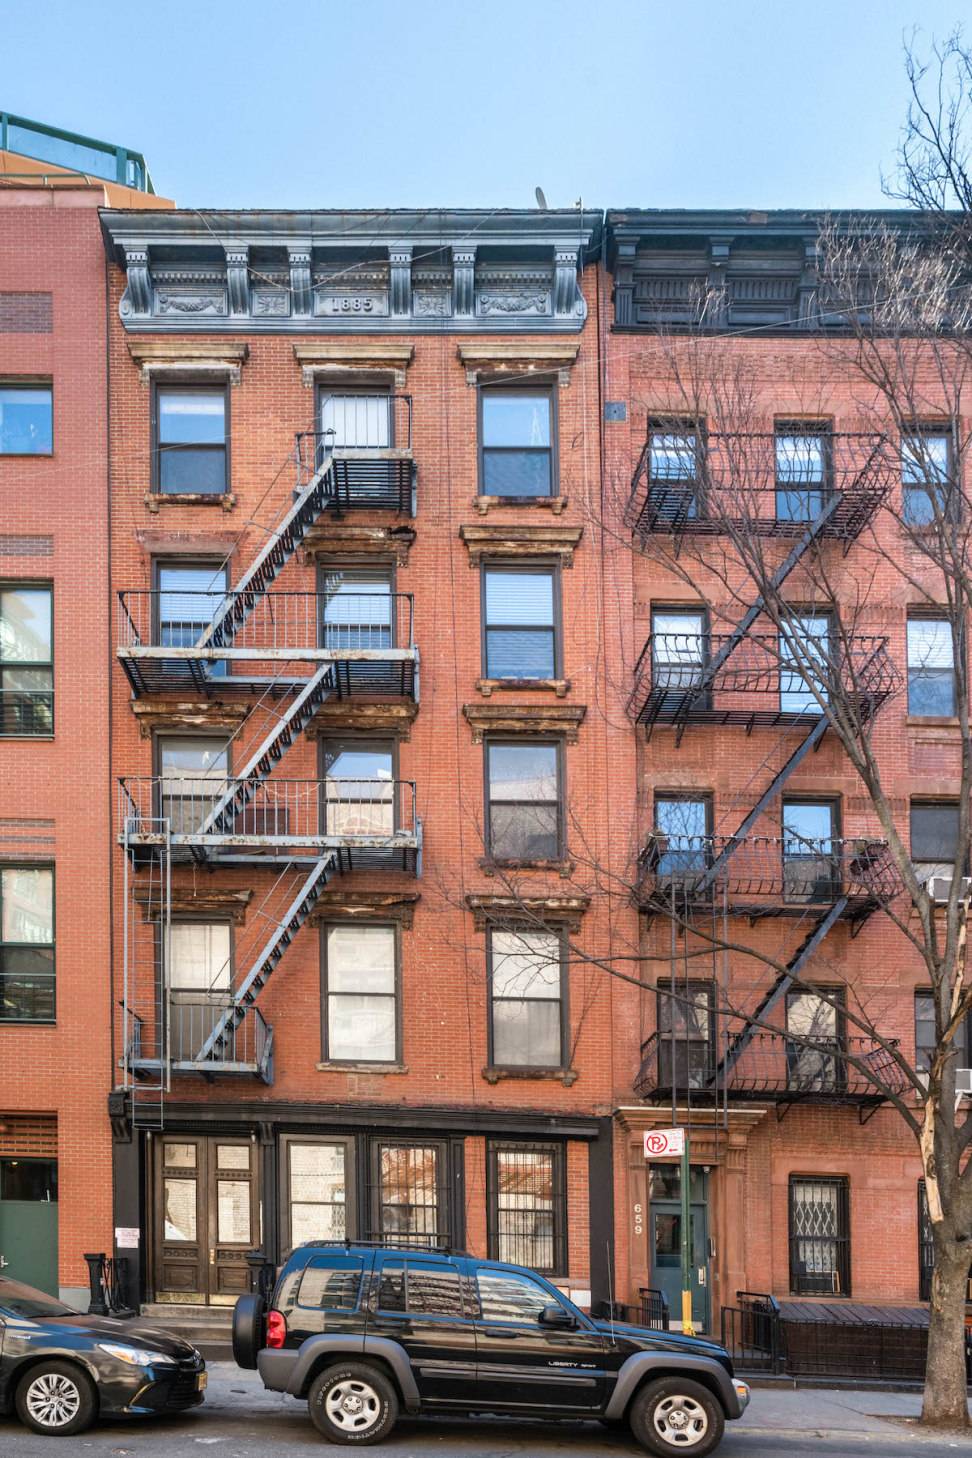 661 Washington Street is a five story apartment building, located between West 10th and Christopher Streets in the heart of the West Village of Manhattan.